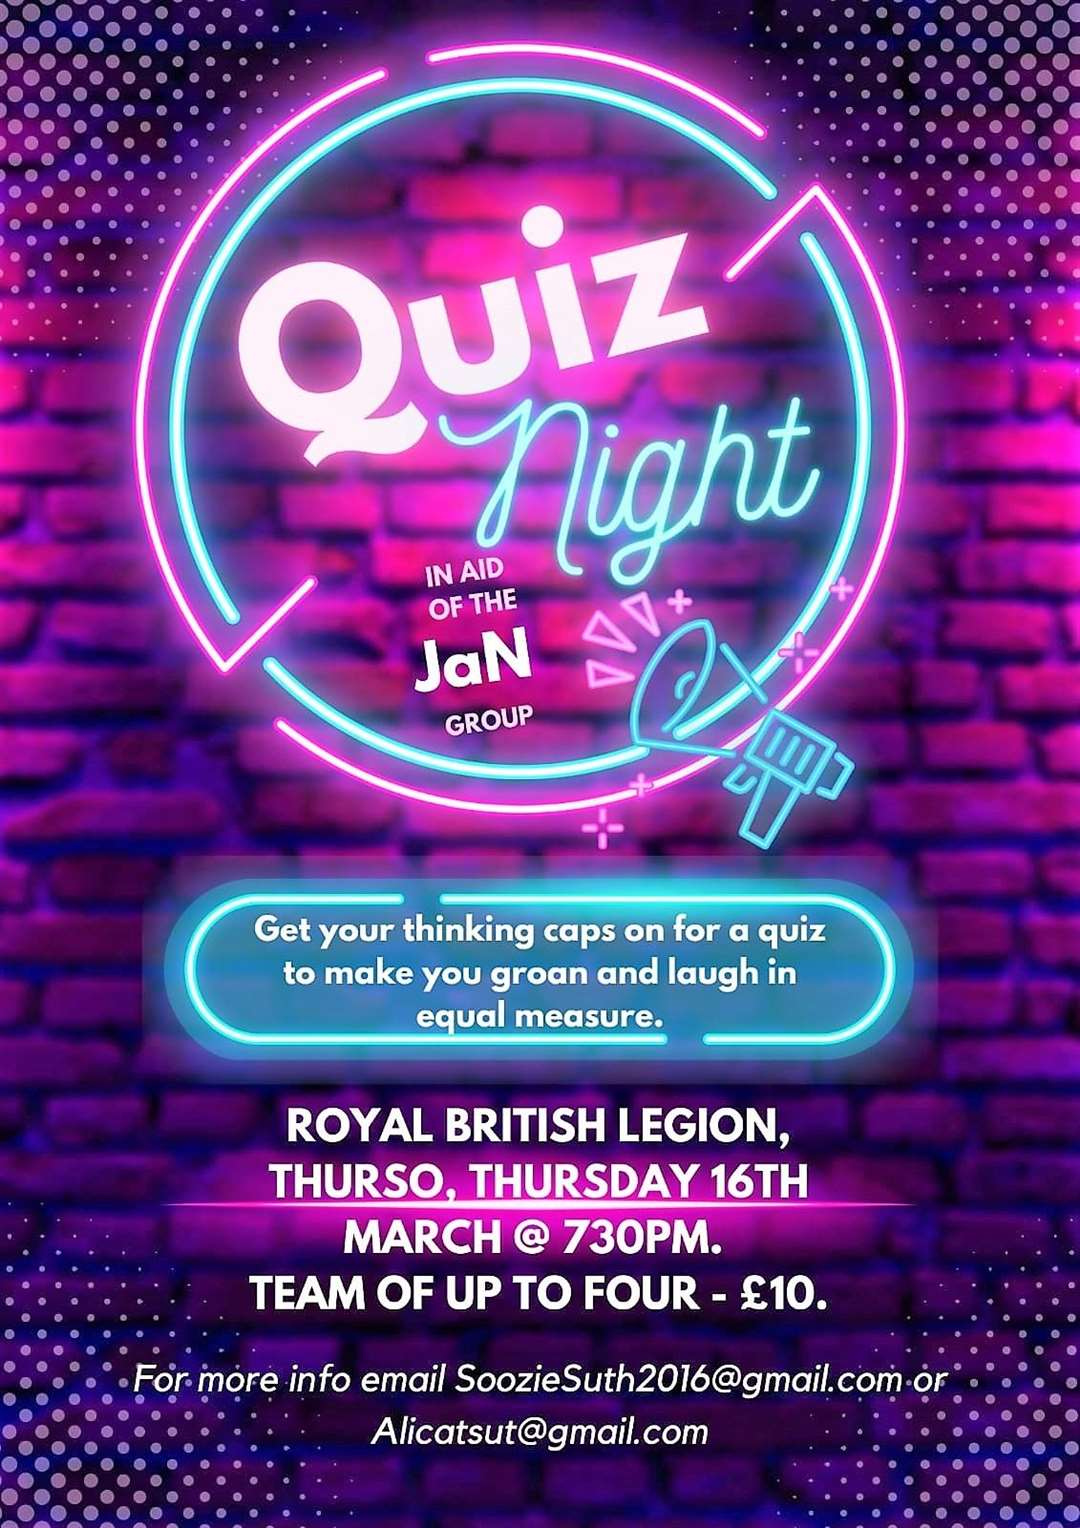 Poster for the JaN quiz night.